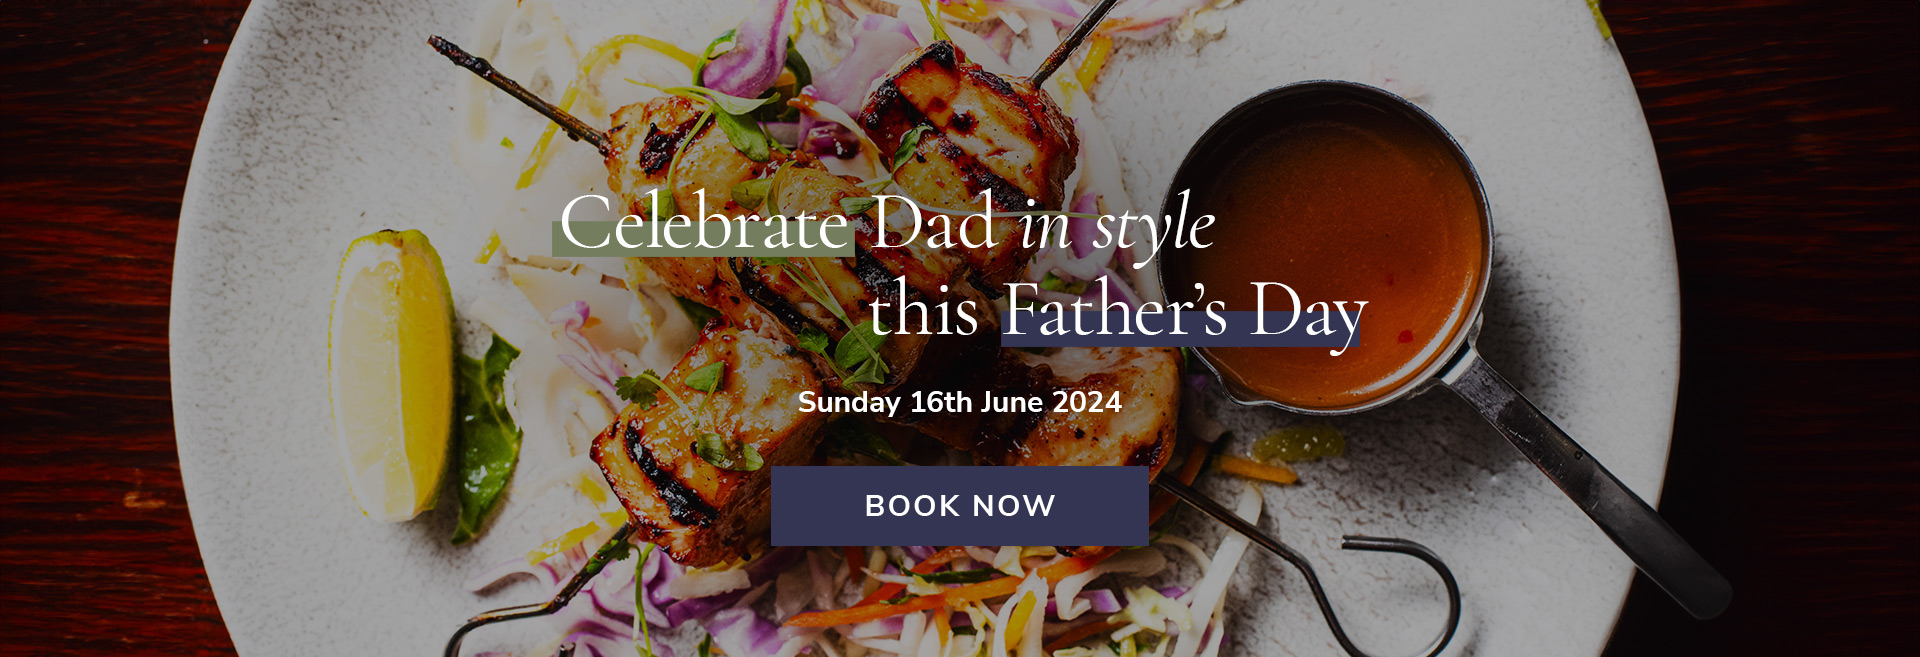 Father's Day at The Botanist on the Green